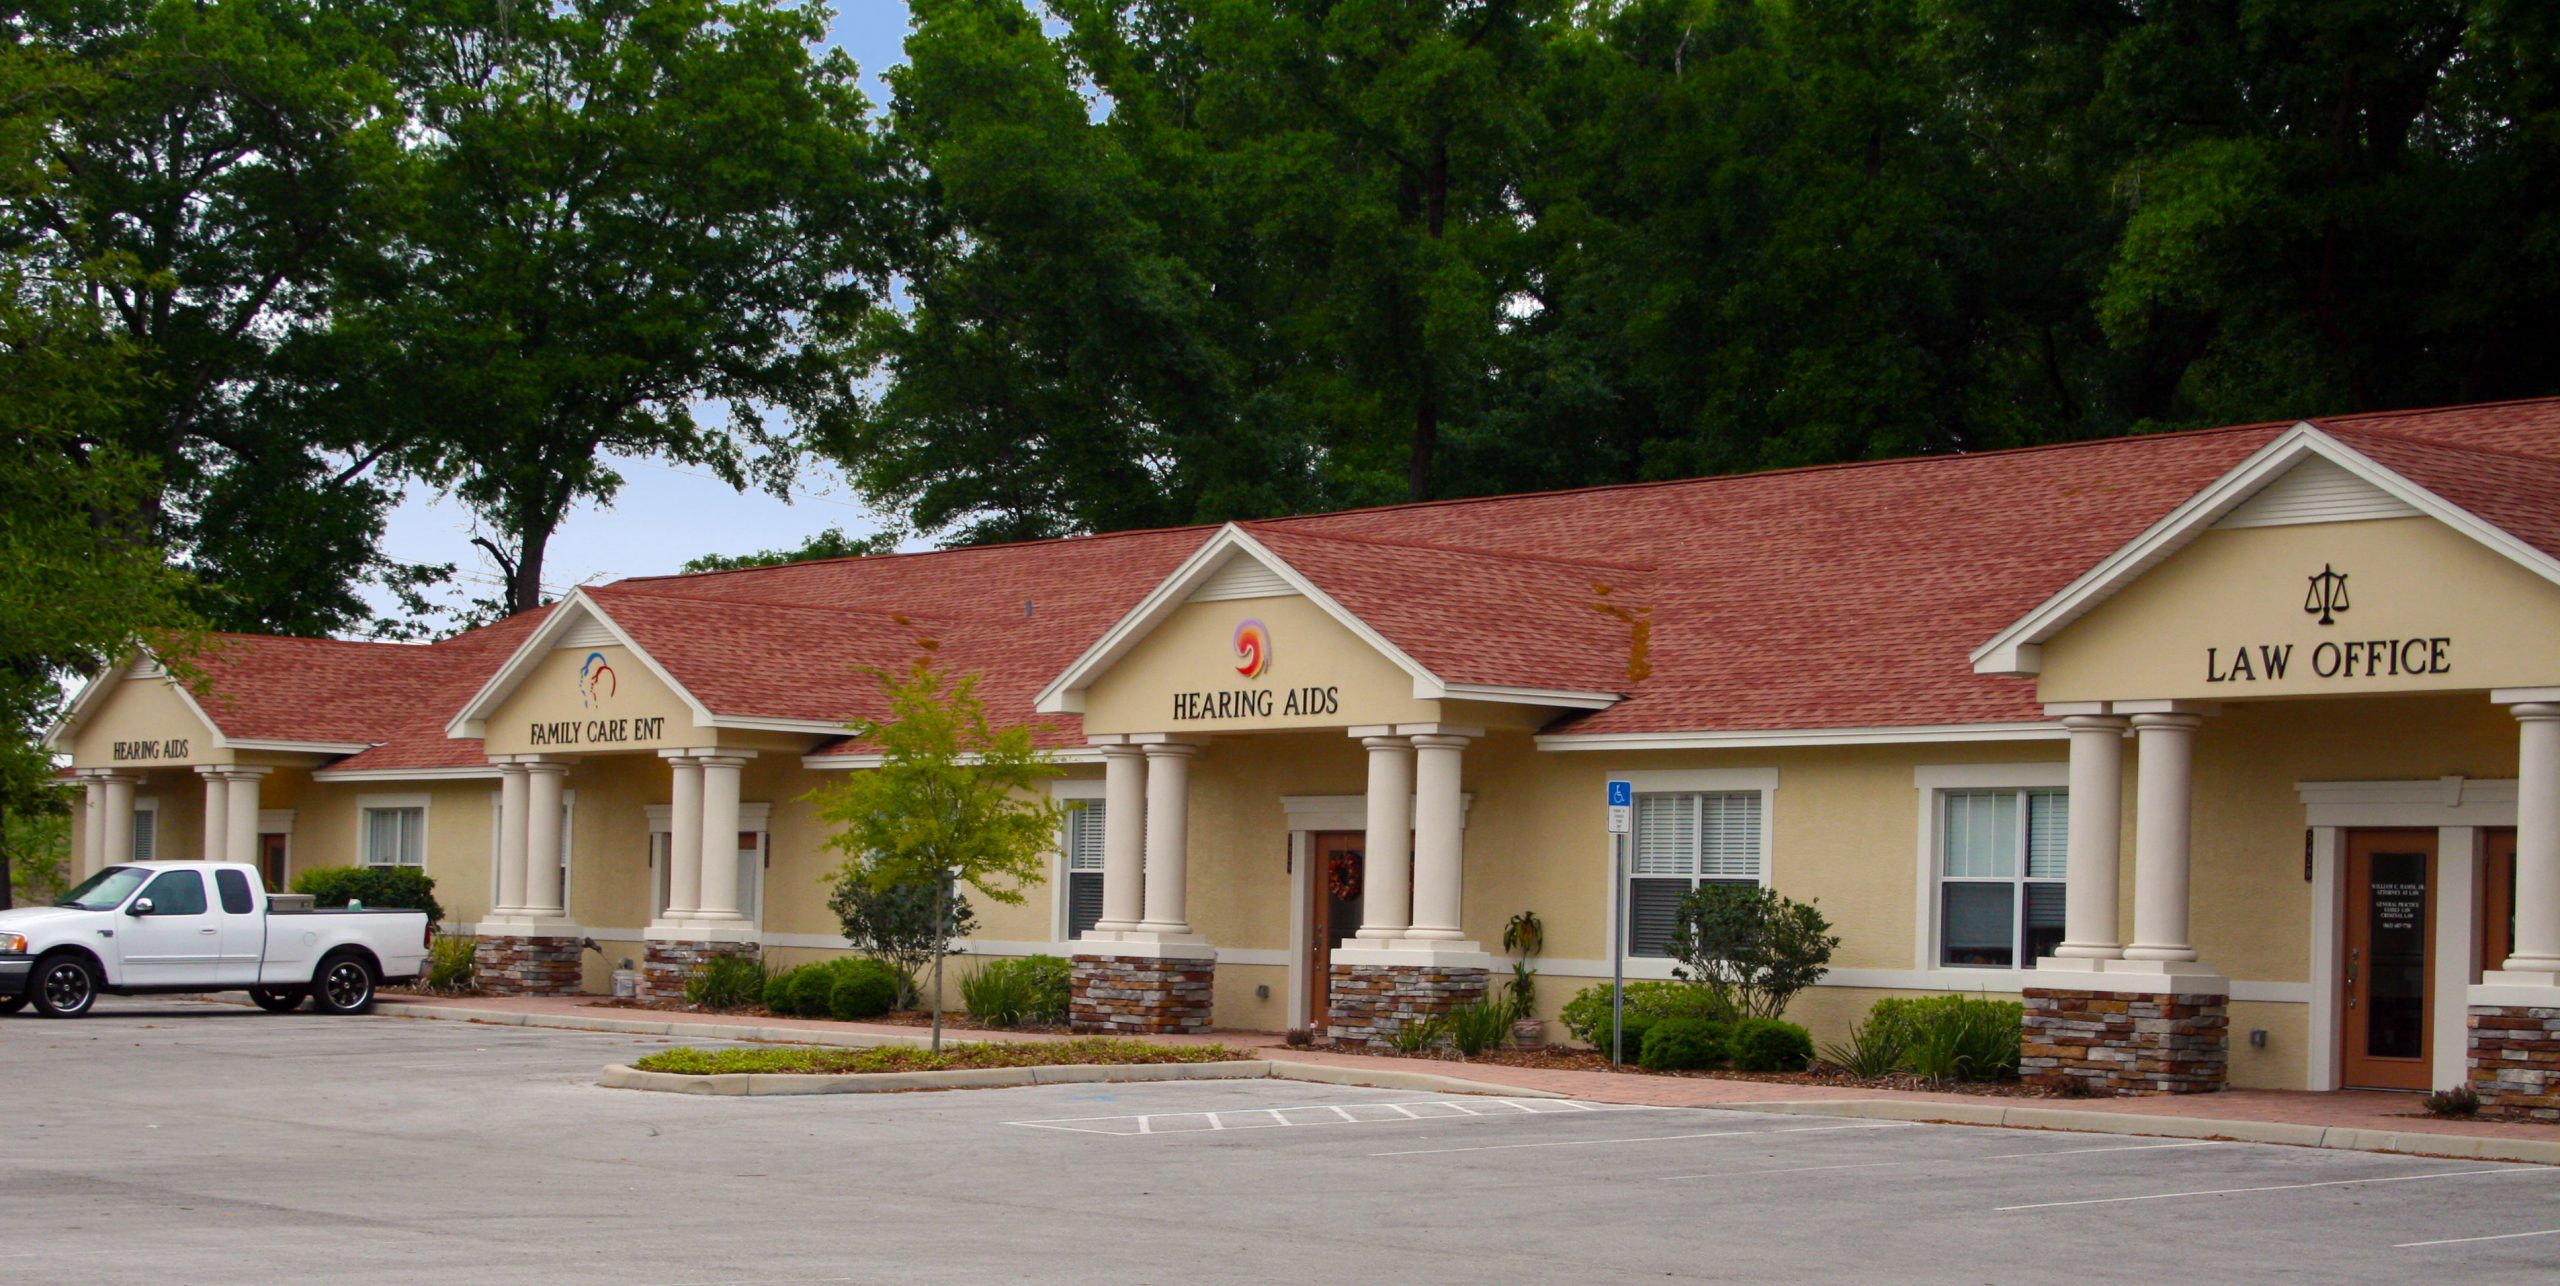 Commercial office building with family care ENT, Hearing Aids, and Law Office